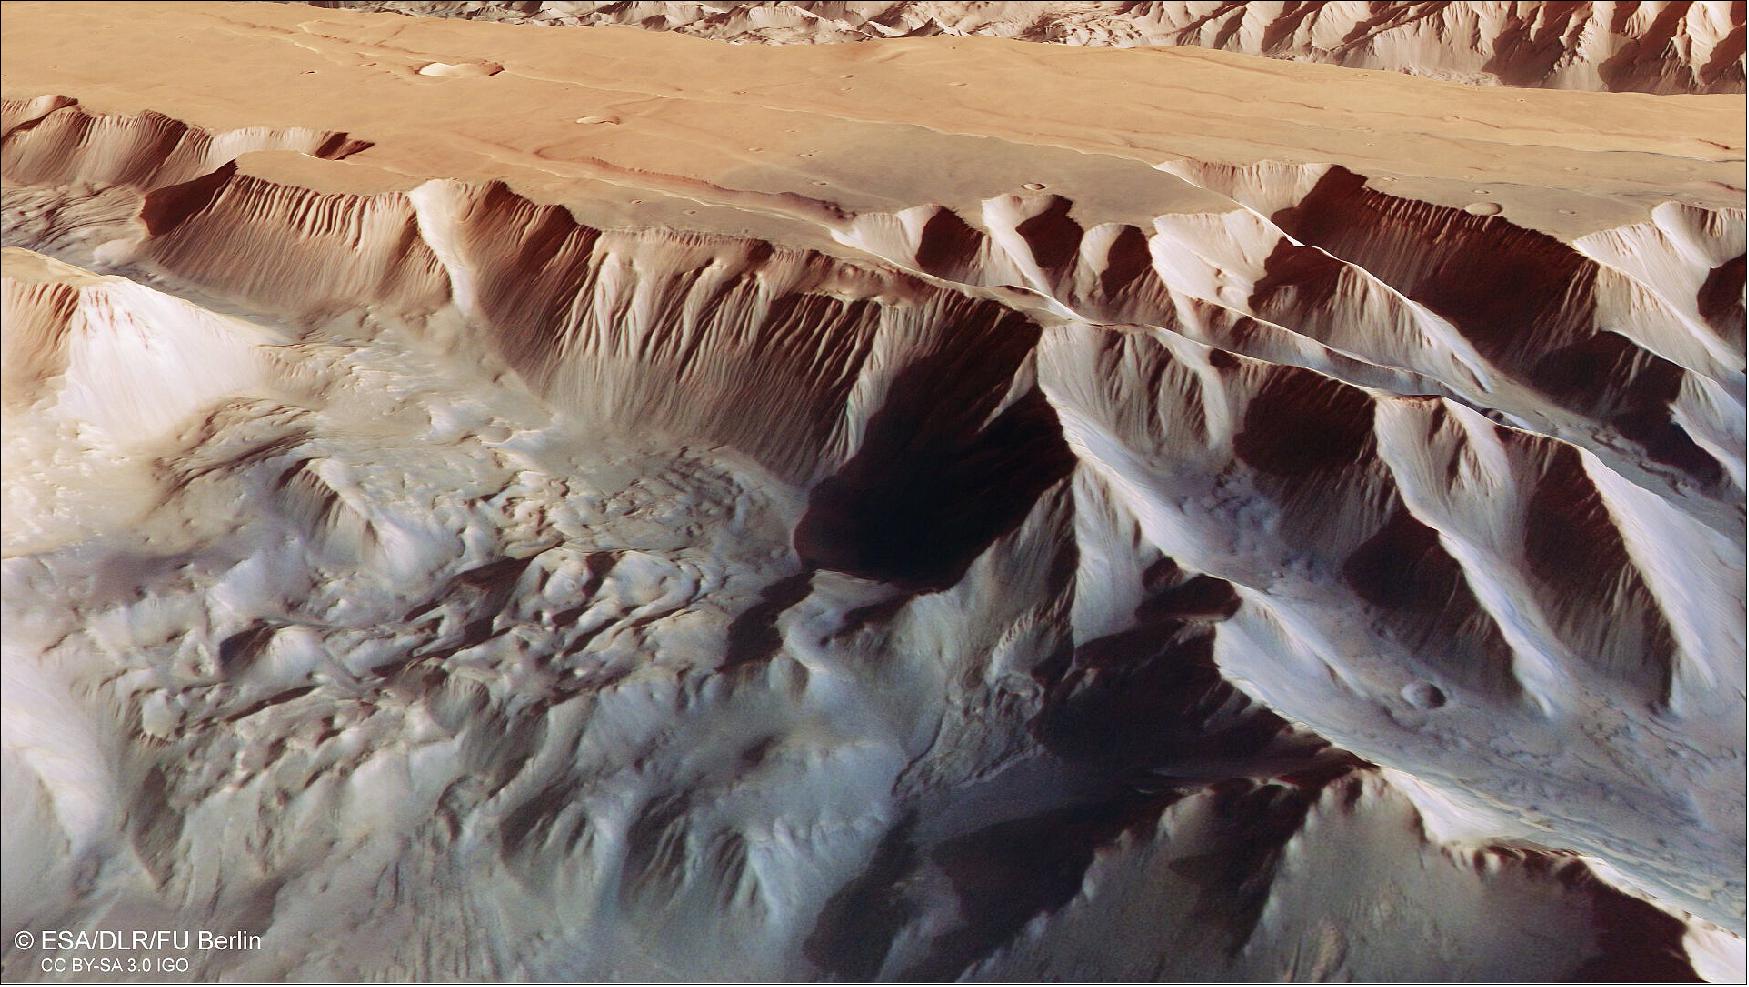 Figure 6: This oblique perspective view of Tithonium Chasmata, which forms part of Mars’ Valles Marineris canyon structure, was generated from the digital terrain model and the nadir and colour channels of the High Resolution Stereo Camera on ESA’s Mars Express. It shows part of the box marked 'dark dunes' in this annotated image (image credit: ESA/DLR/FU Berlin, CC BY-SA 3.0 IGO)